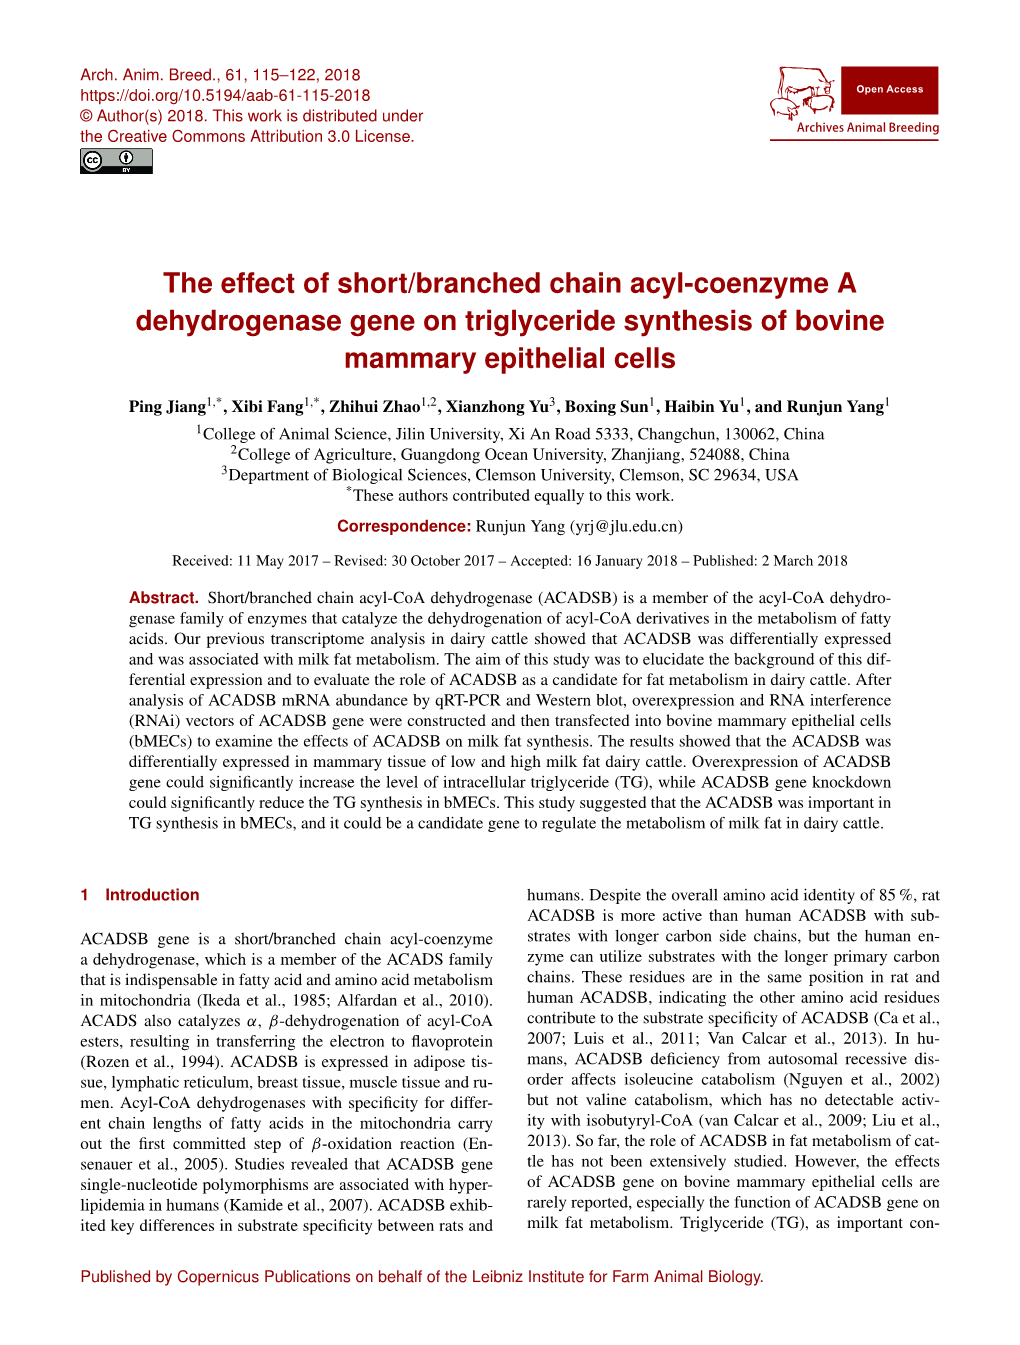 The Effect of Short/Branched Chain Acyl-Coenzyme a Dehydrogenase Gene on Triglyceride Synthesis of Bovine Mammary Epithelial Cells